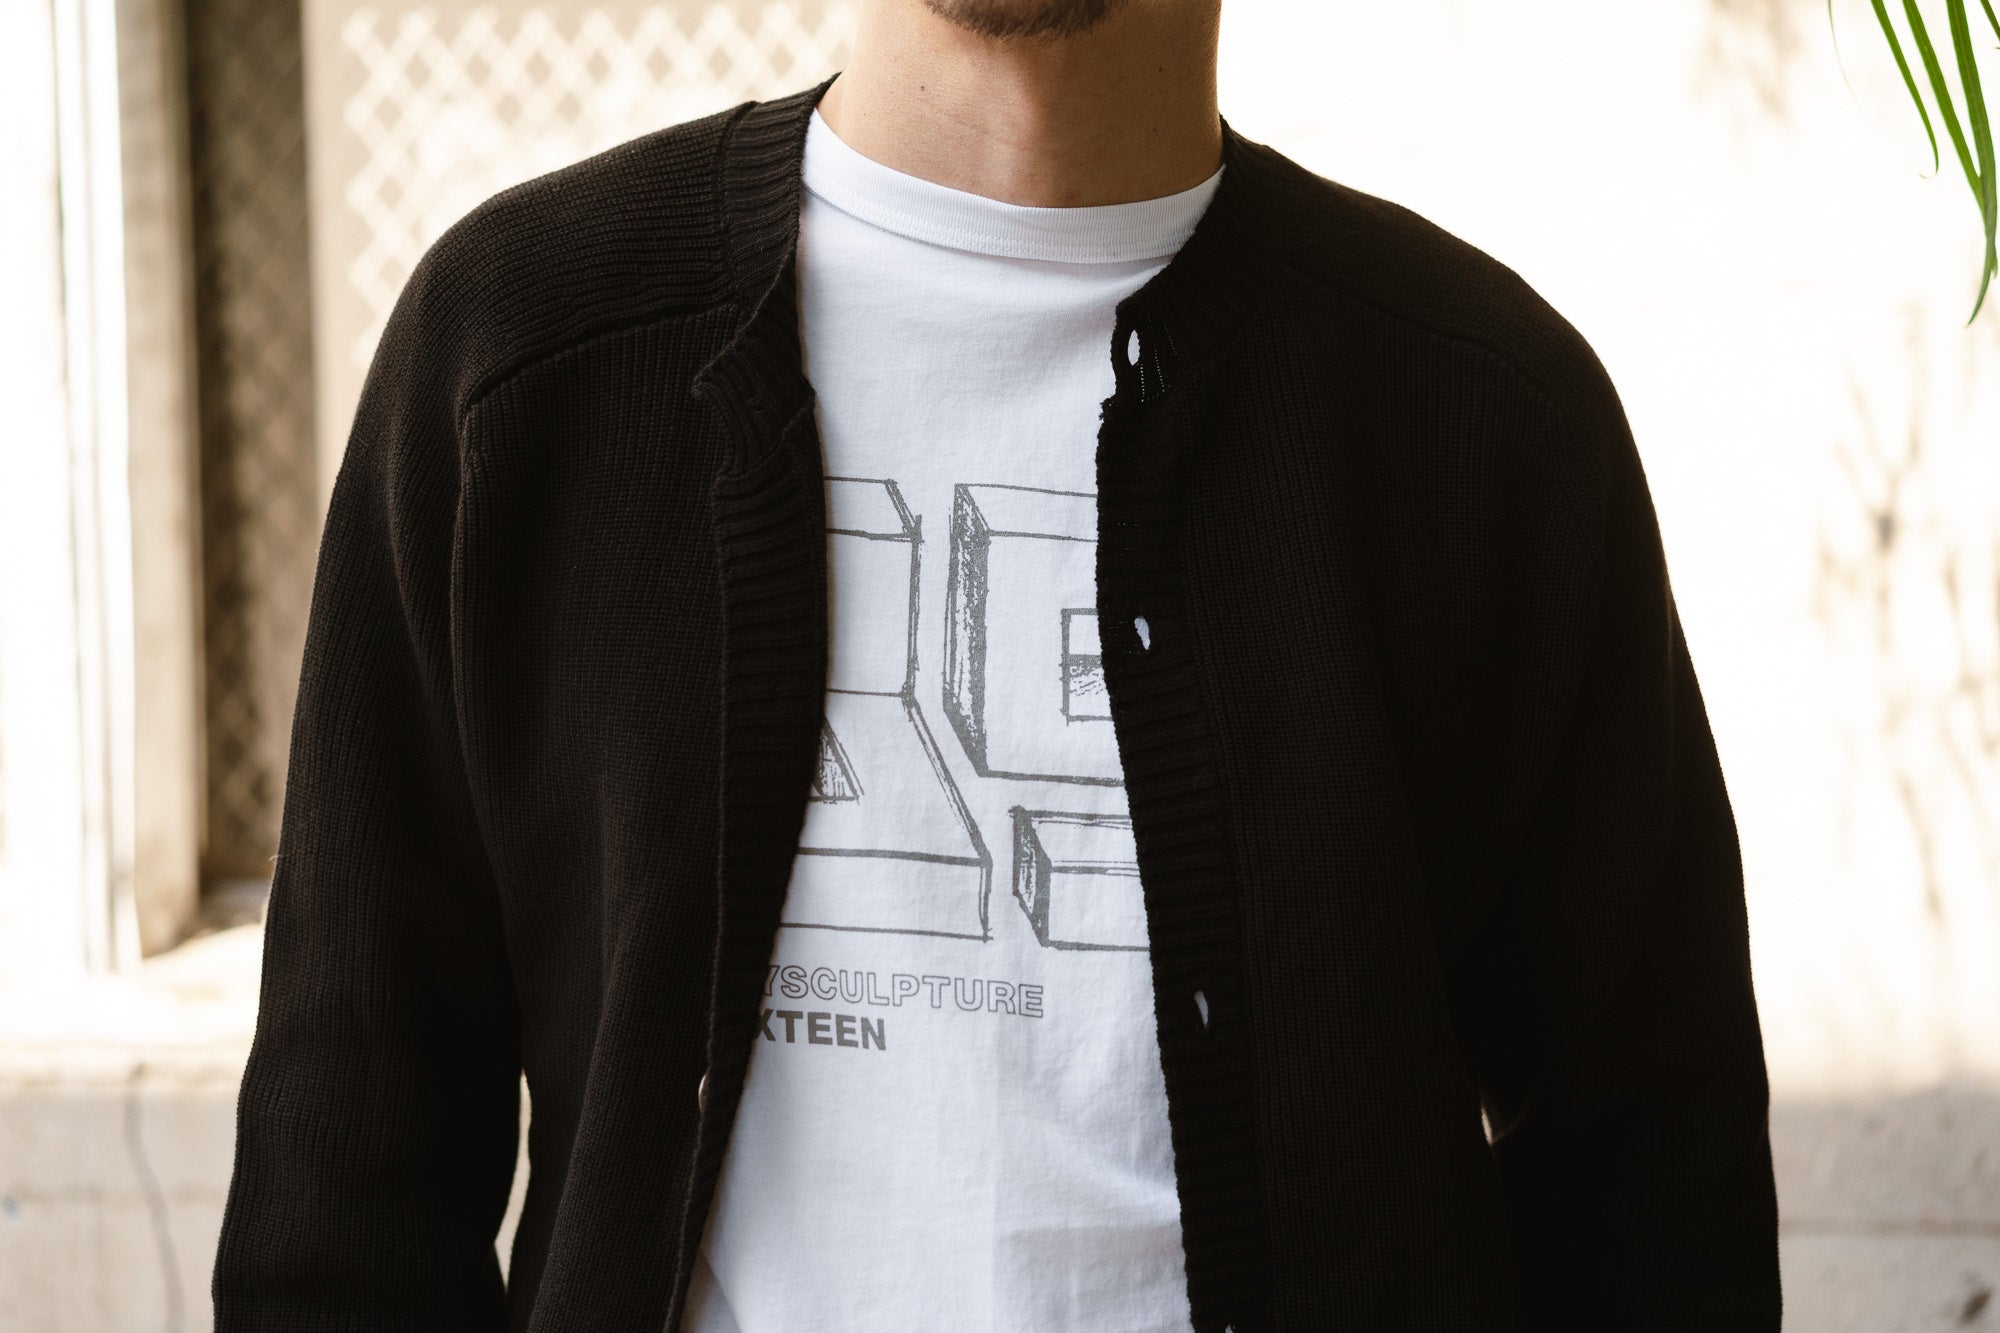 A man wears the Playscapes tee under a black cardigan.